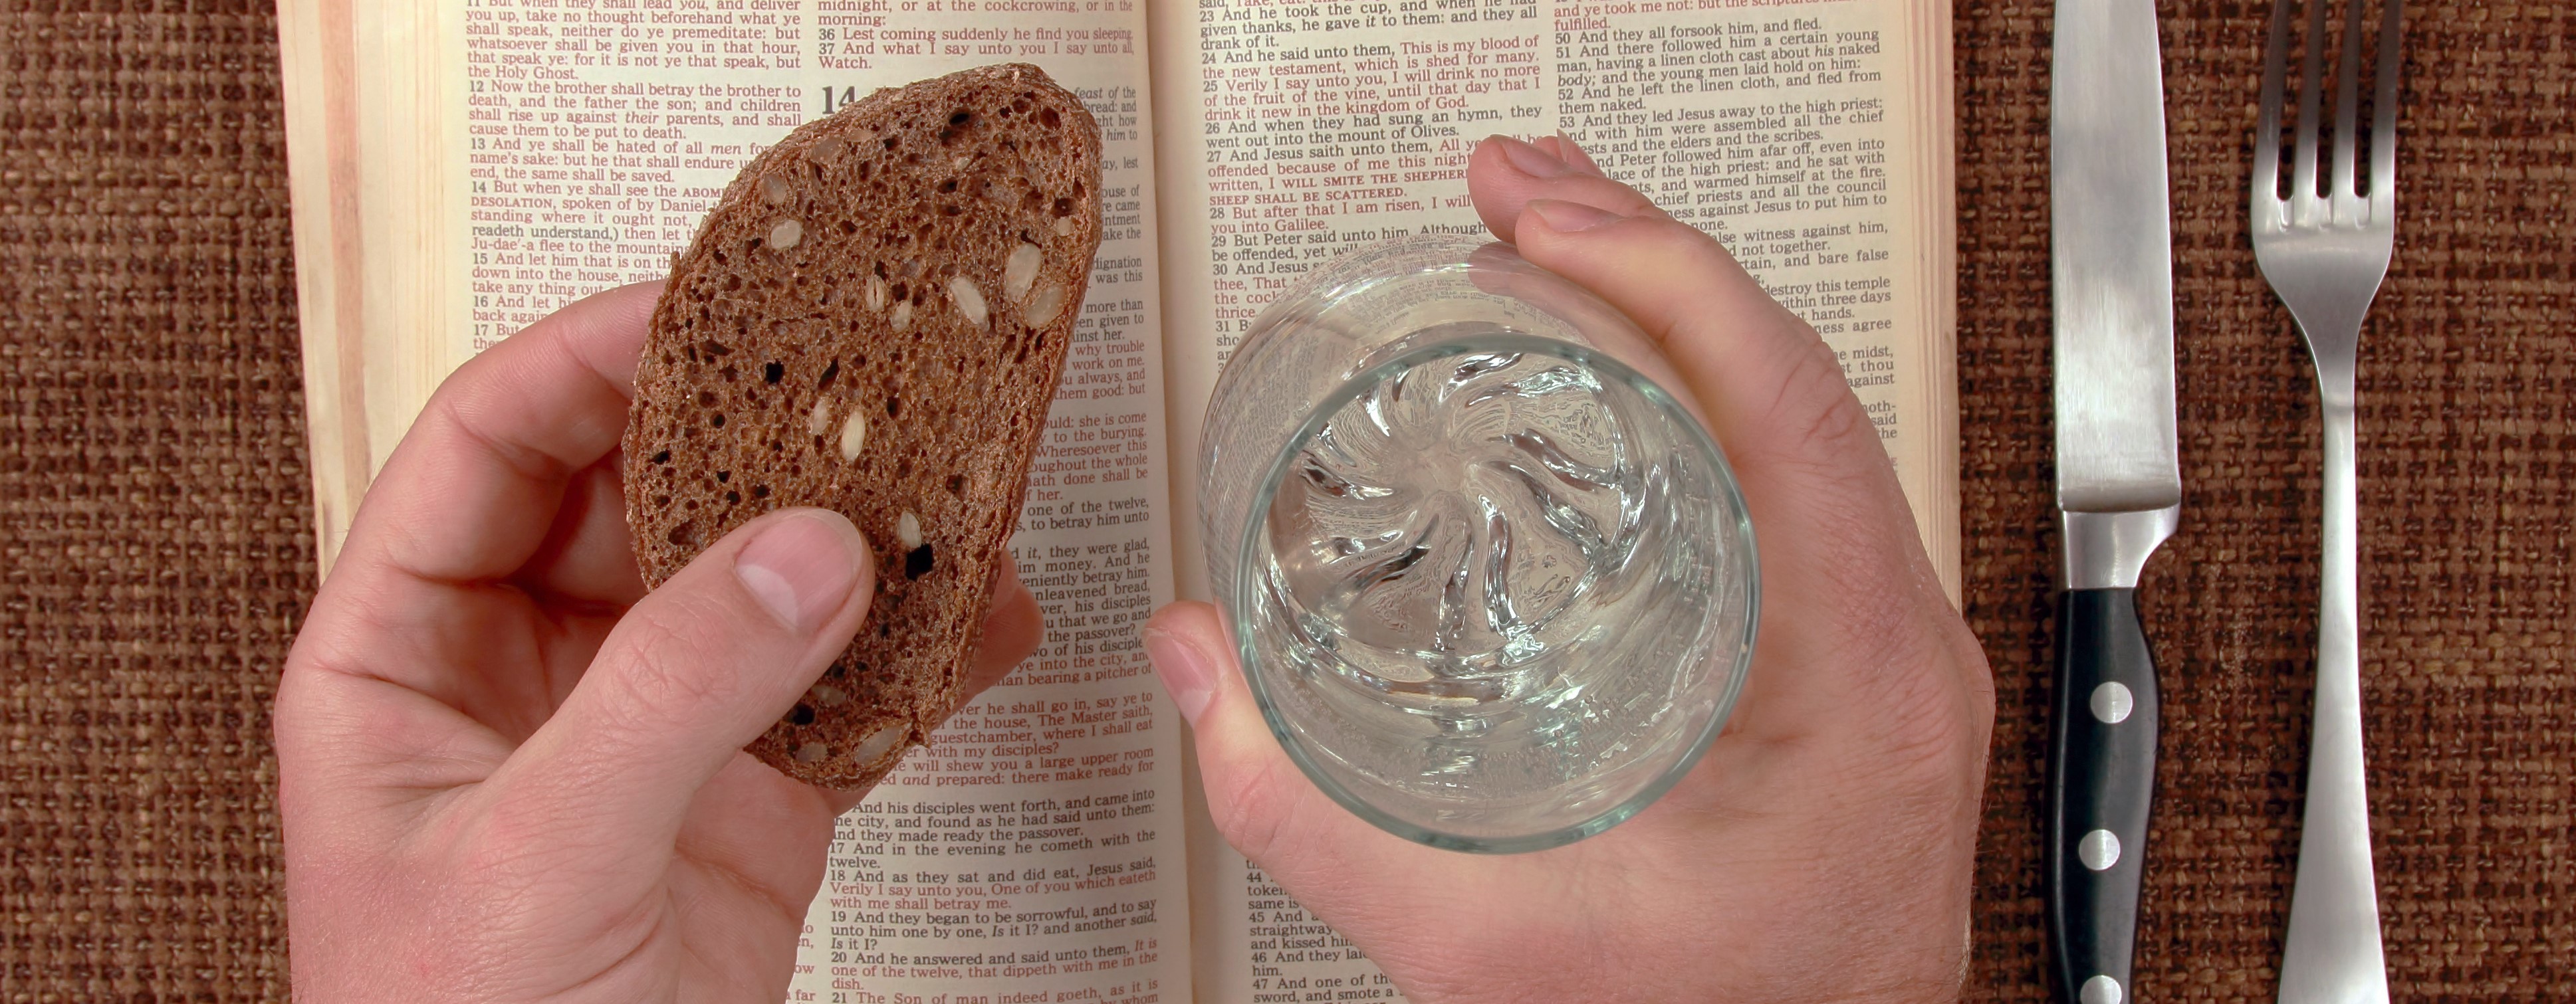 Bible with bread and water